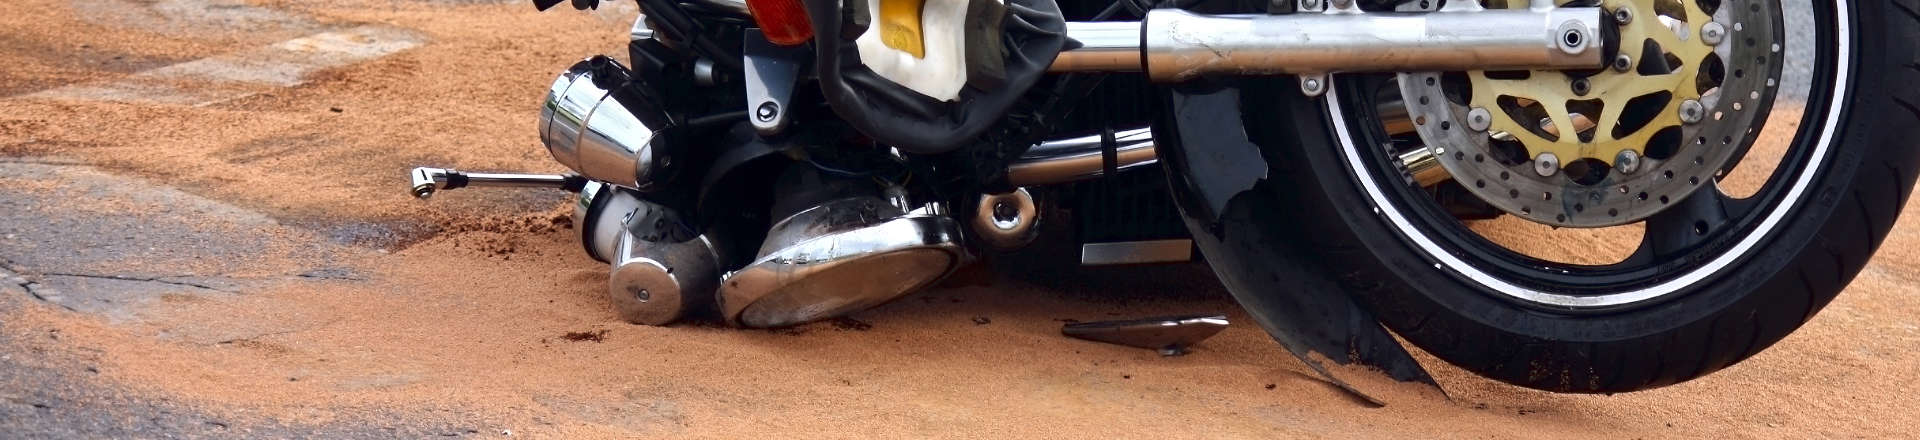 a motorcycle on a road after an accident